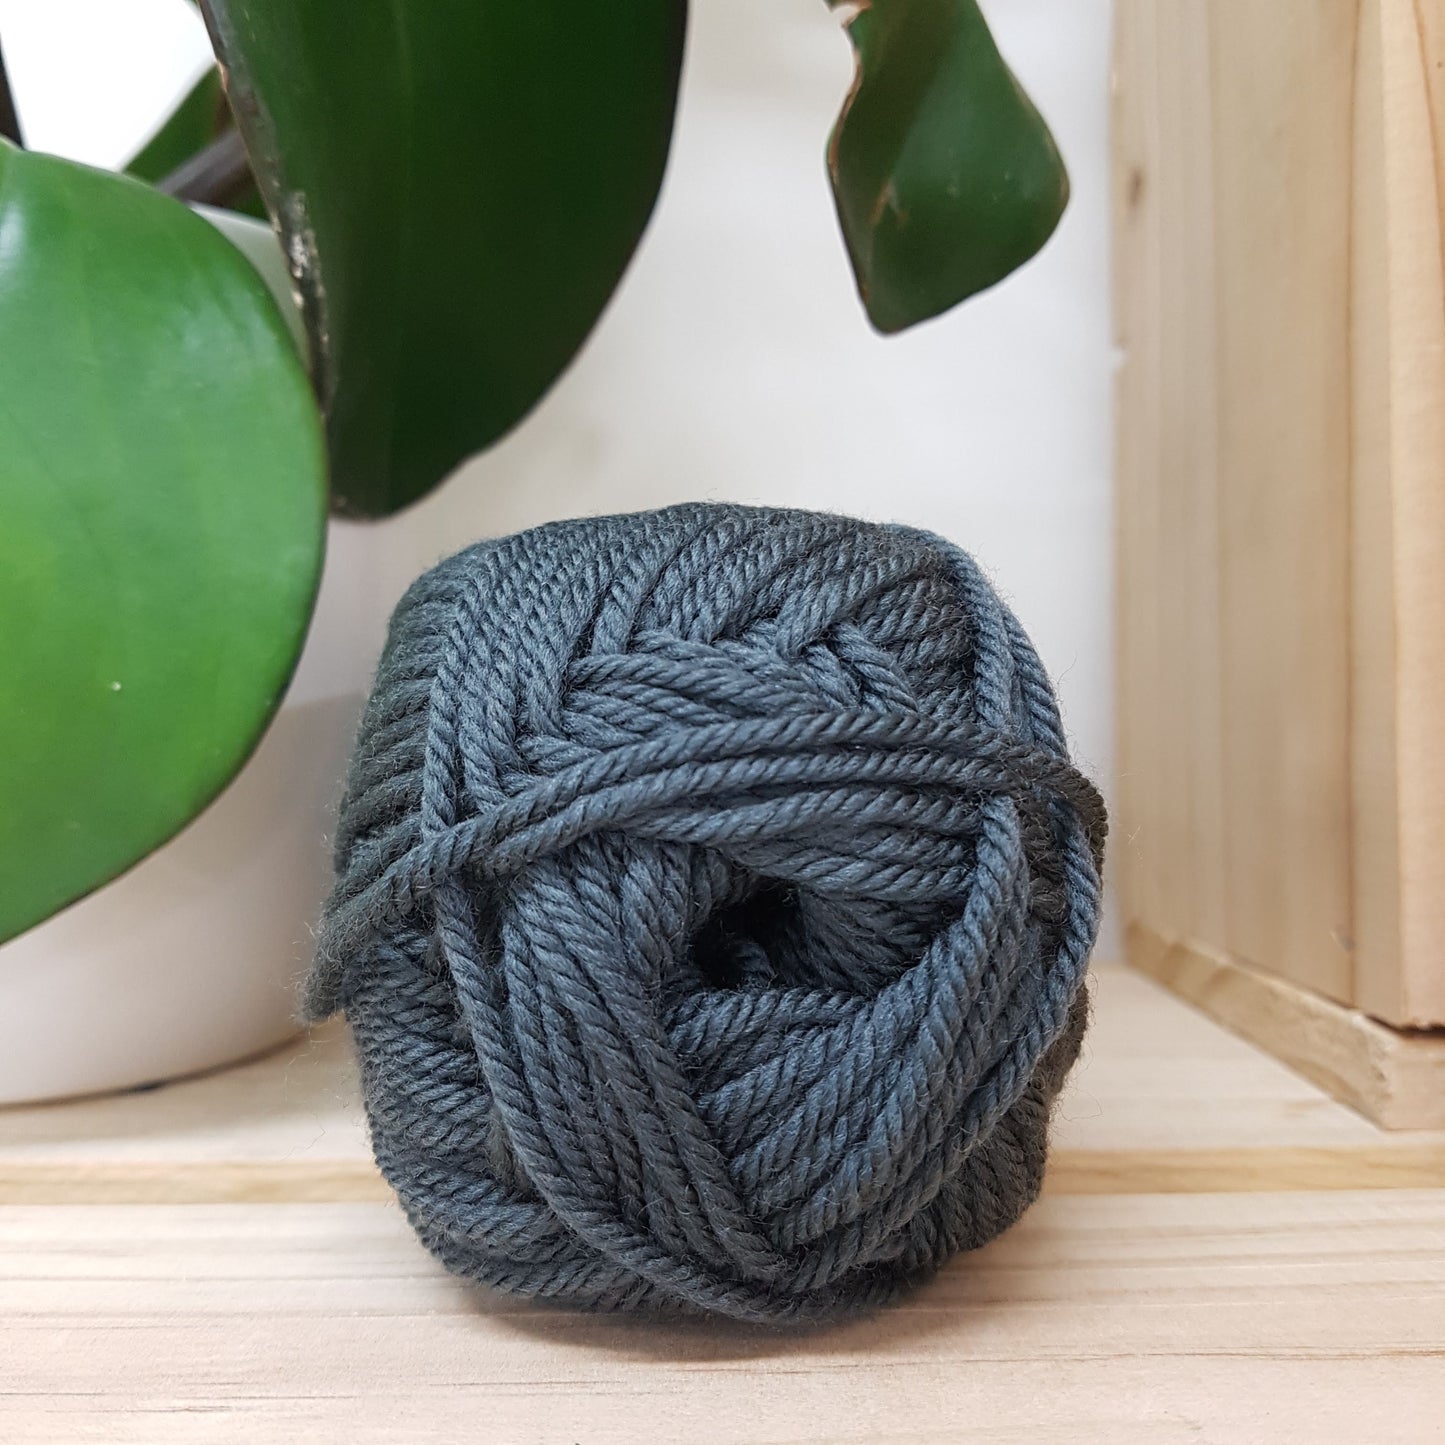 Touch Yarns - Pure Merino 8ply - Charcoal